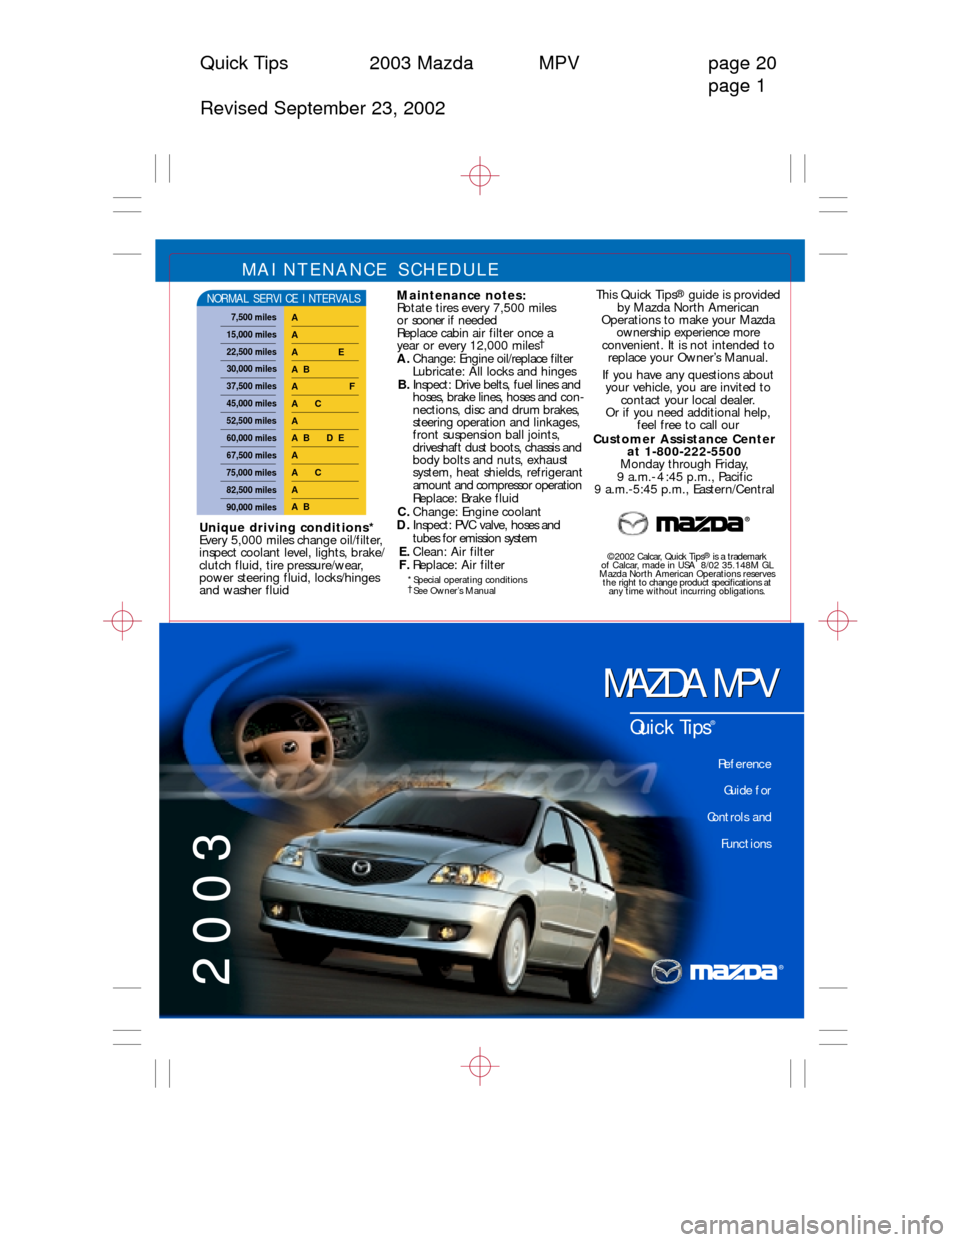 MAZDA MODEL MPV 2003  Quick Tips (in English) Quick Tips 2003 Mazda MPV page 20
page 1
Revised September 23, 2002
MAINTENANCE SCHEDULE 
Maintenance notes:
Rotate tires every 7,500 miles 
o r  sooner if needed
Replace cabin air filter once a 
year